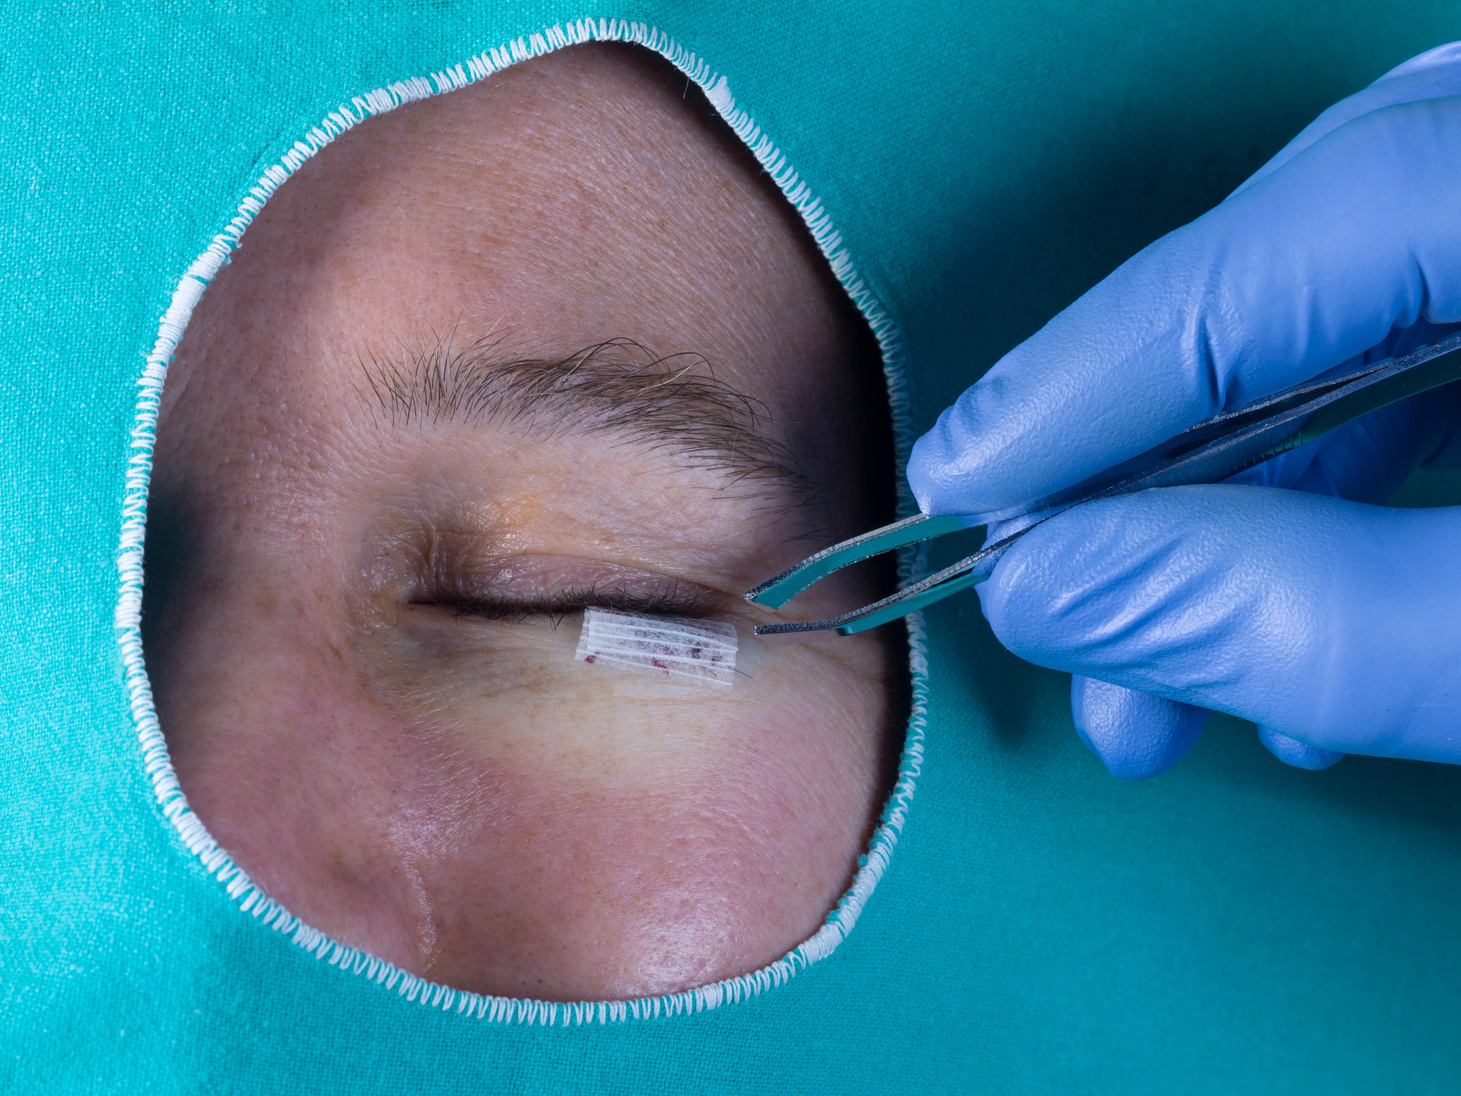 Surgery on the lower eyelid